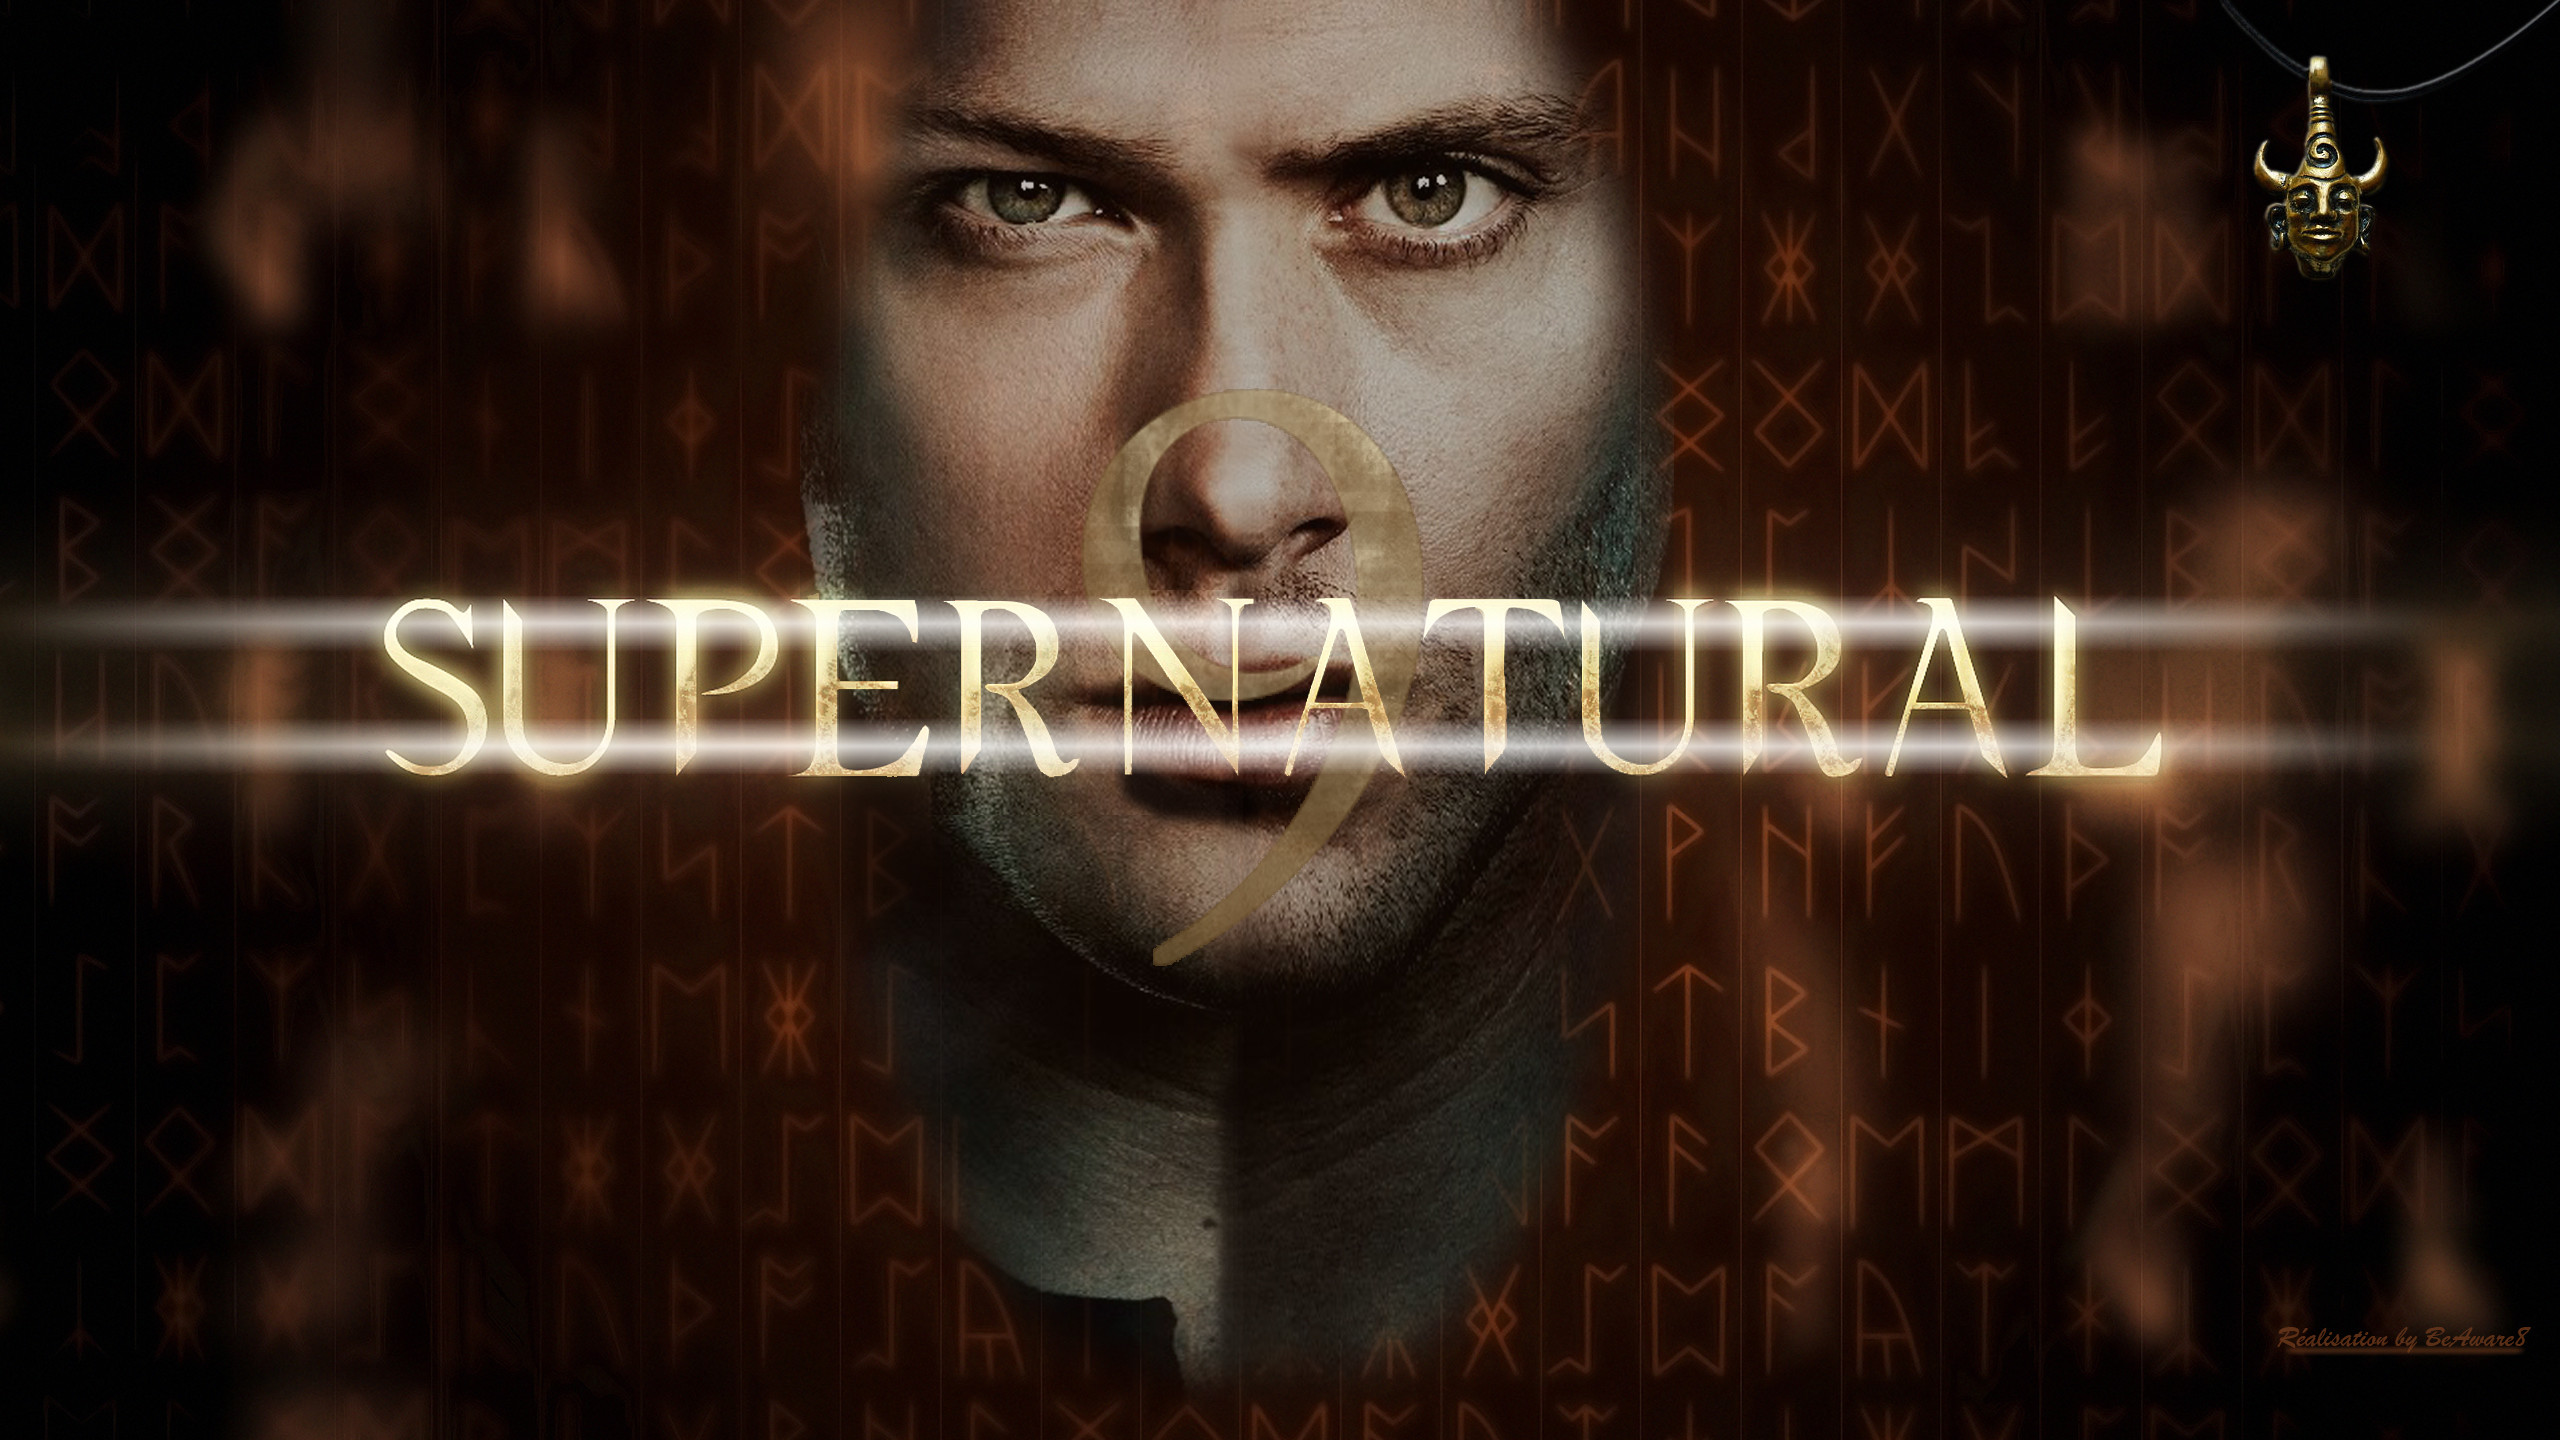 2560x1440 ... Supernatural - Dean and Sam face to face by BeAware8